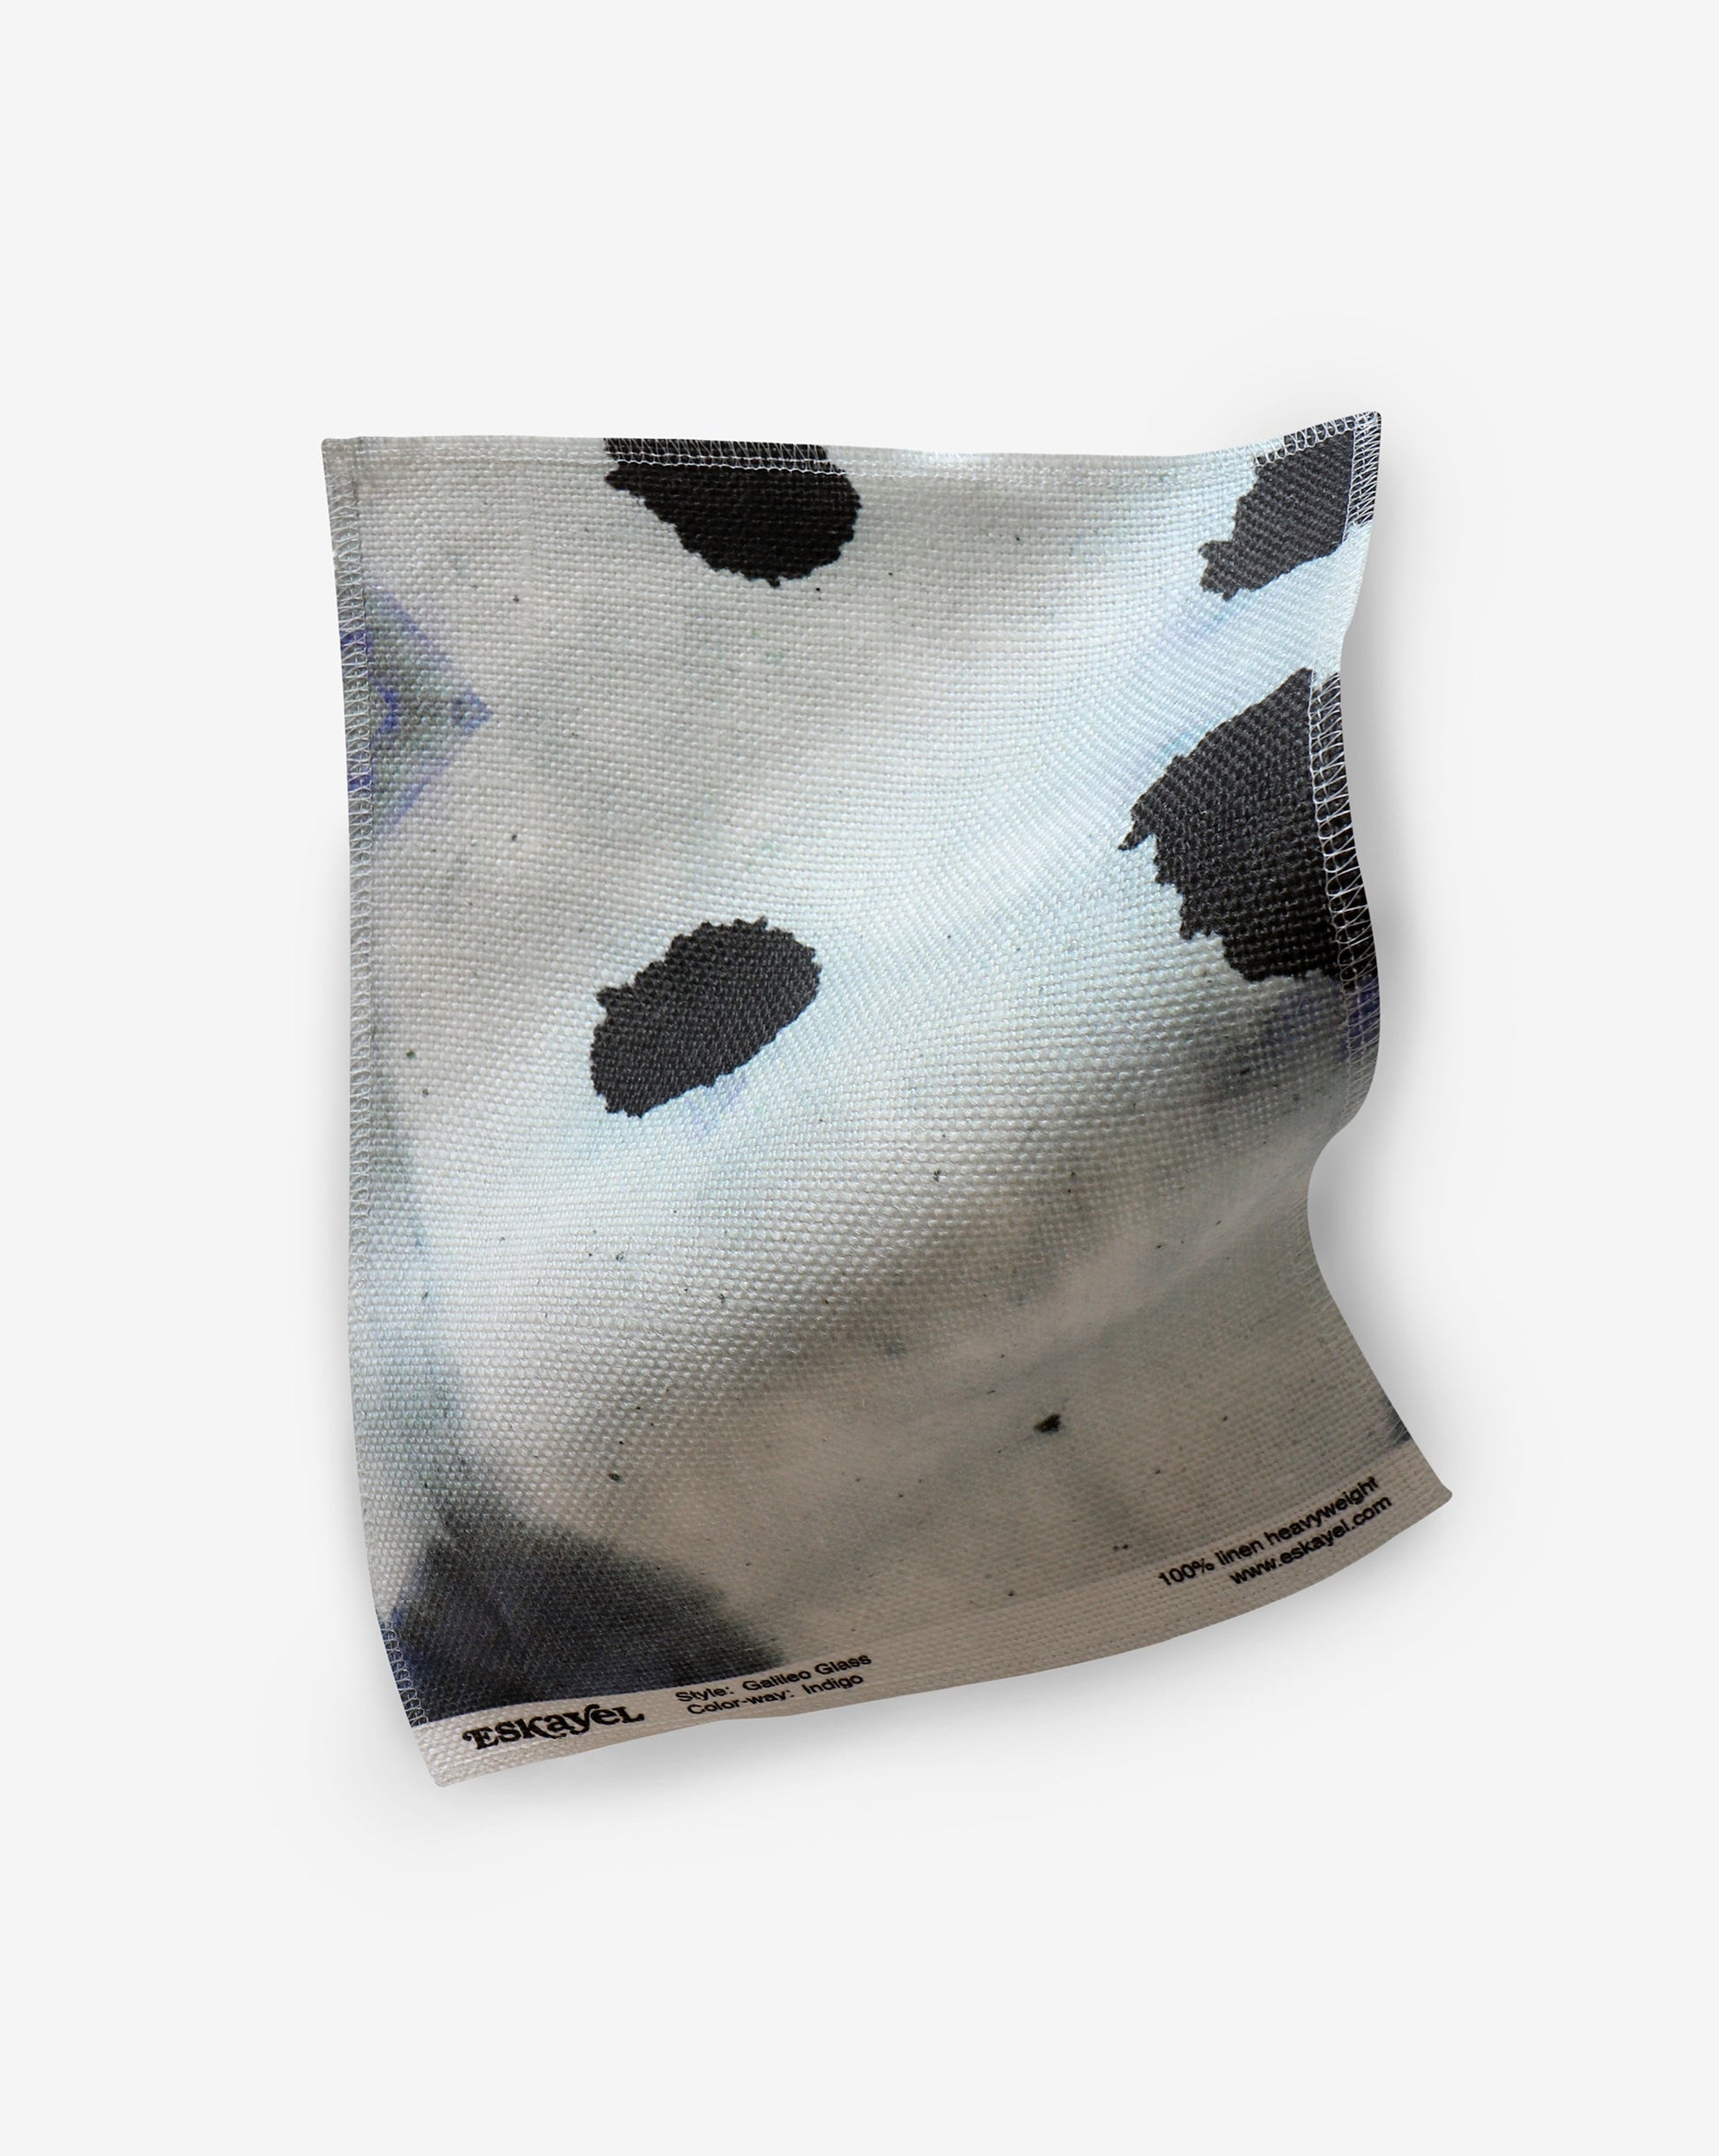 A luxury Galileo Glass fabric with fluid pigments creating black spots on a white cloth